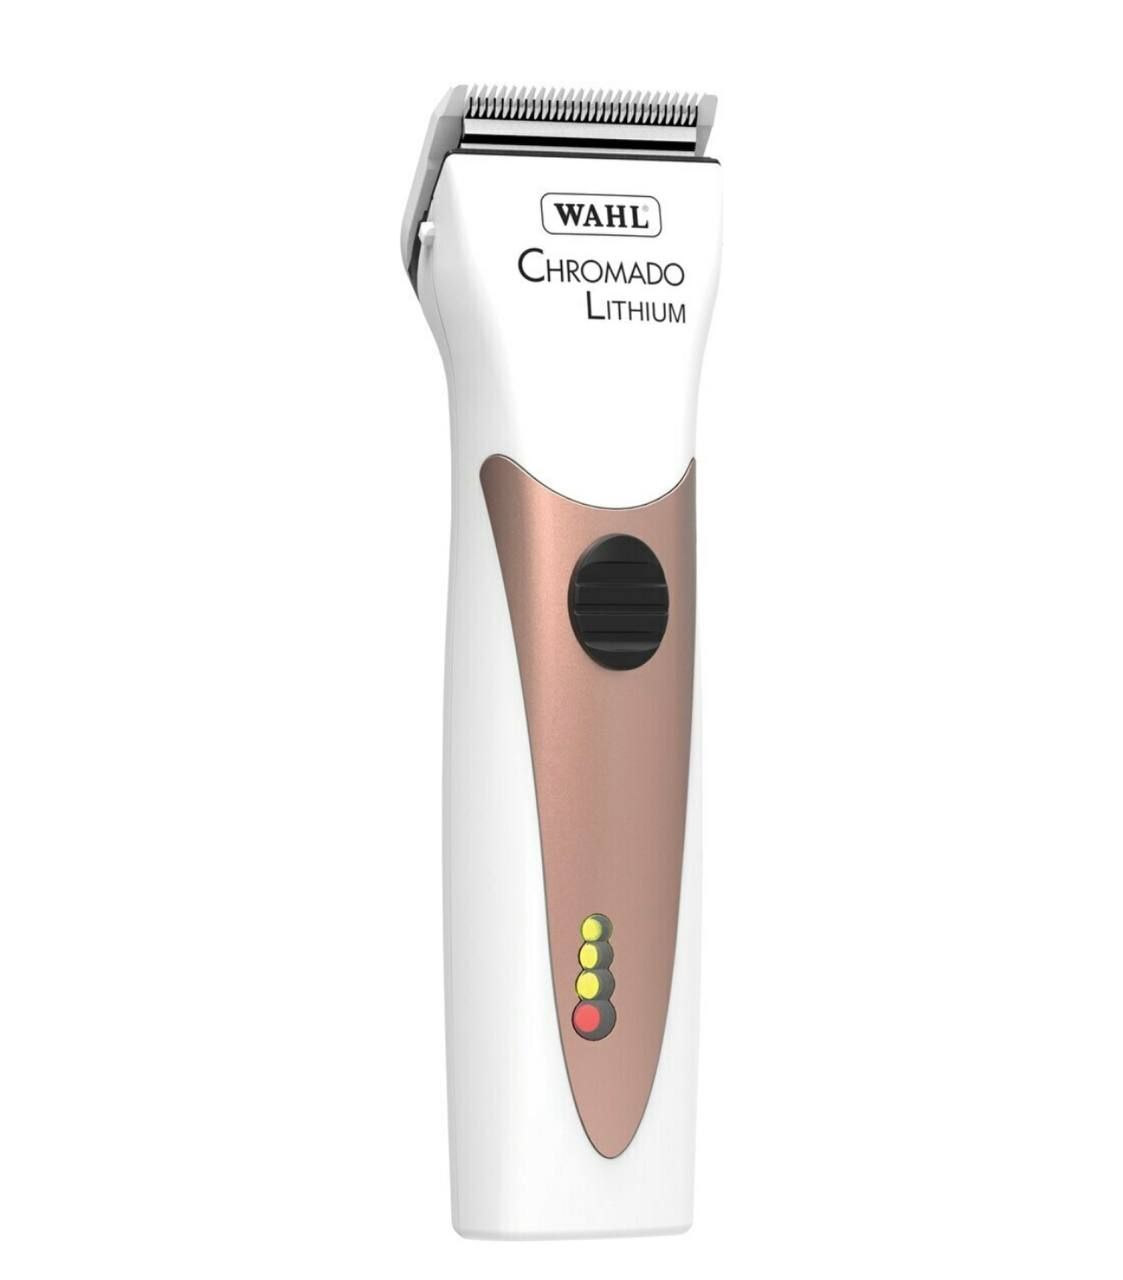 Wahl Chromado Lithium 5-in-1 Clipper, Rose Gold and White